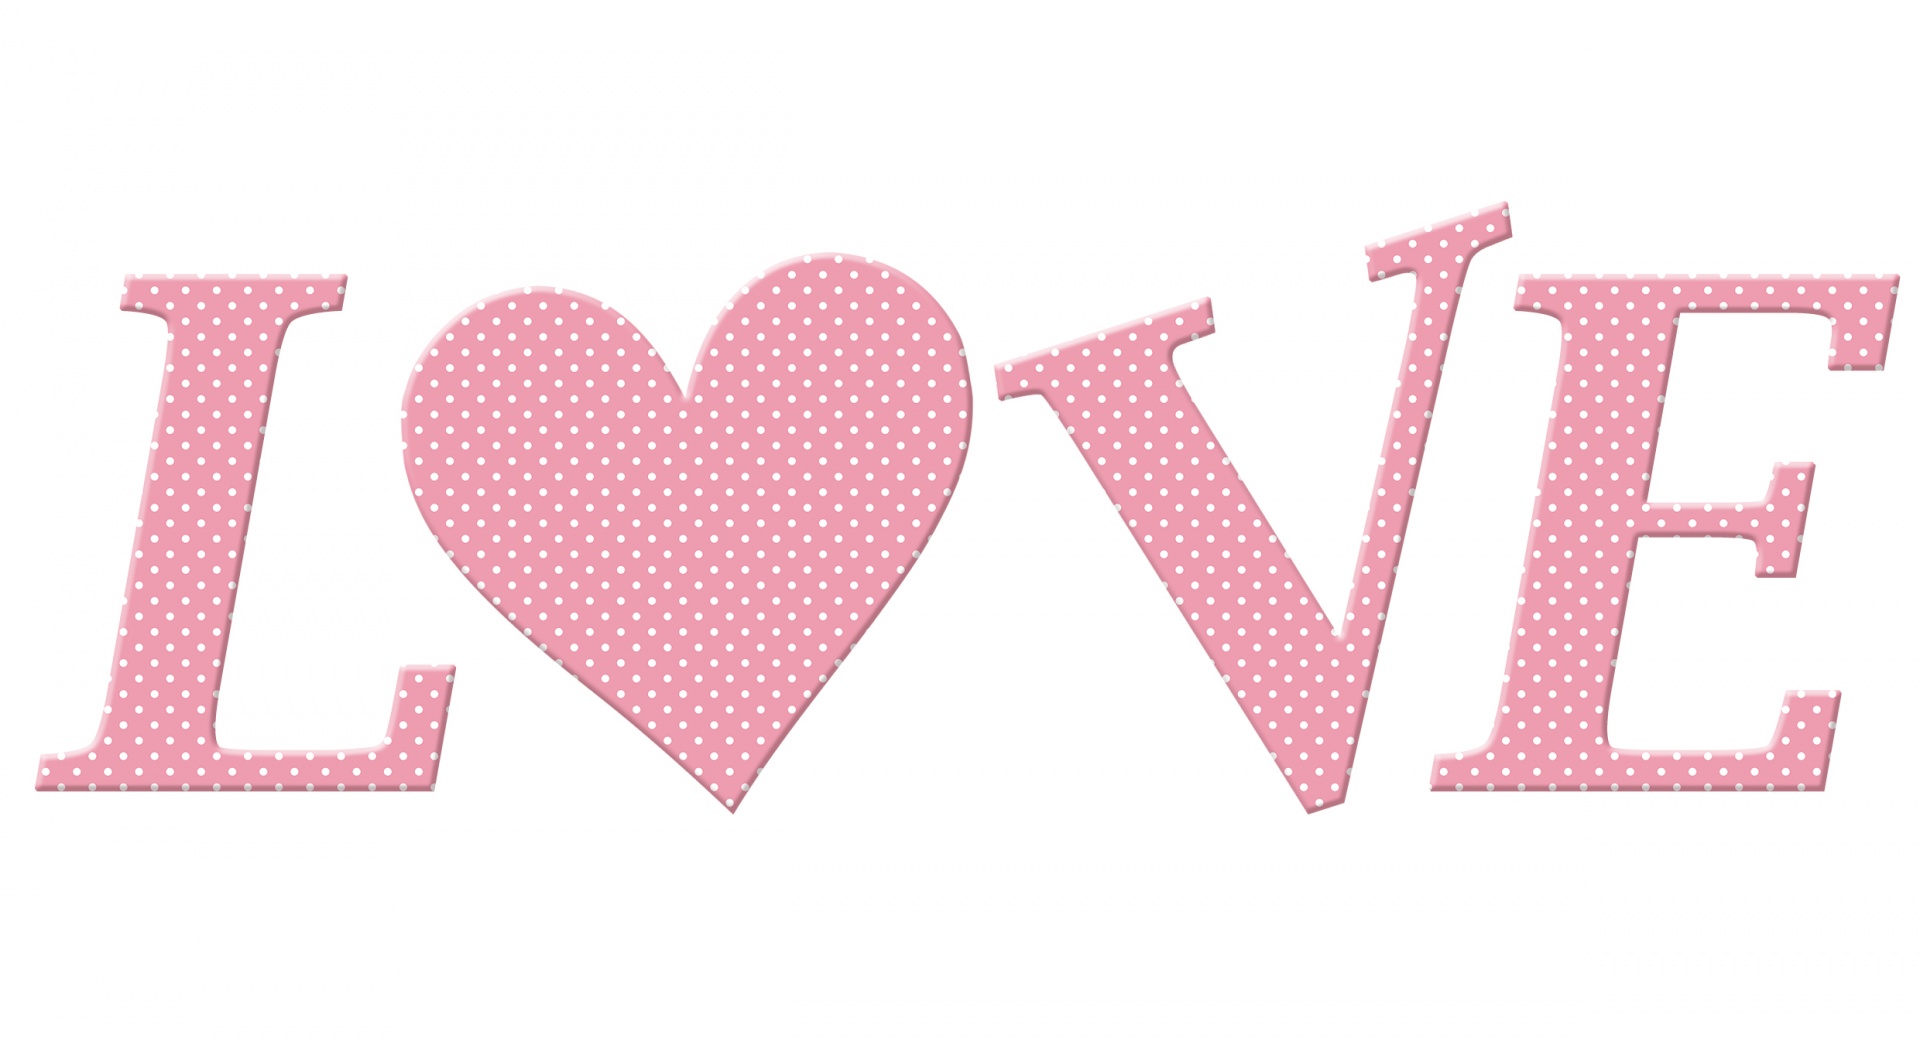 Love Word Clipart Free Stock Photo - Public Domain Pictures